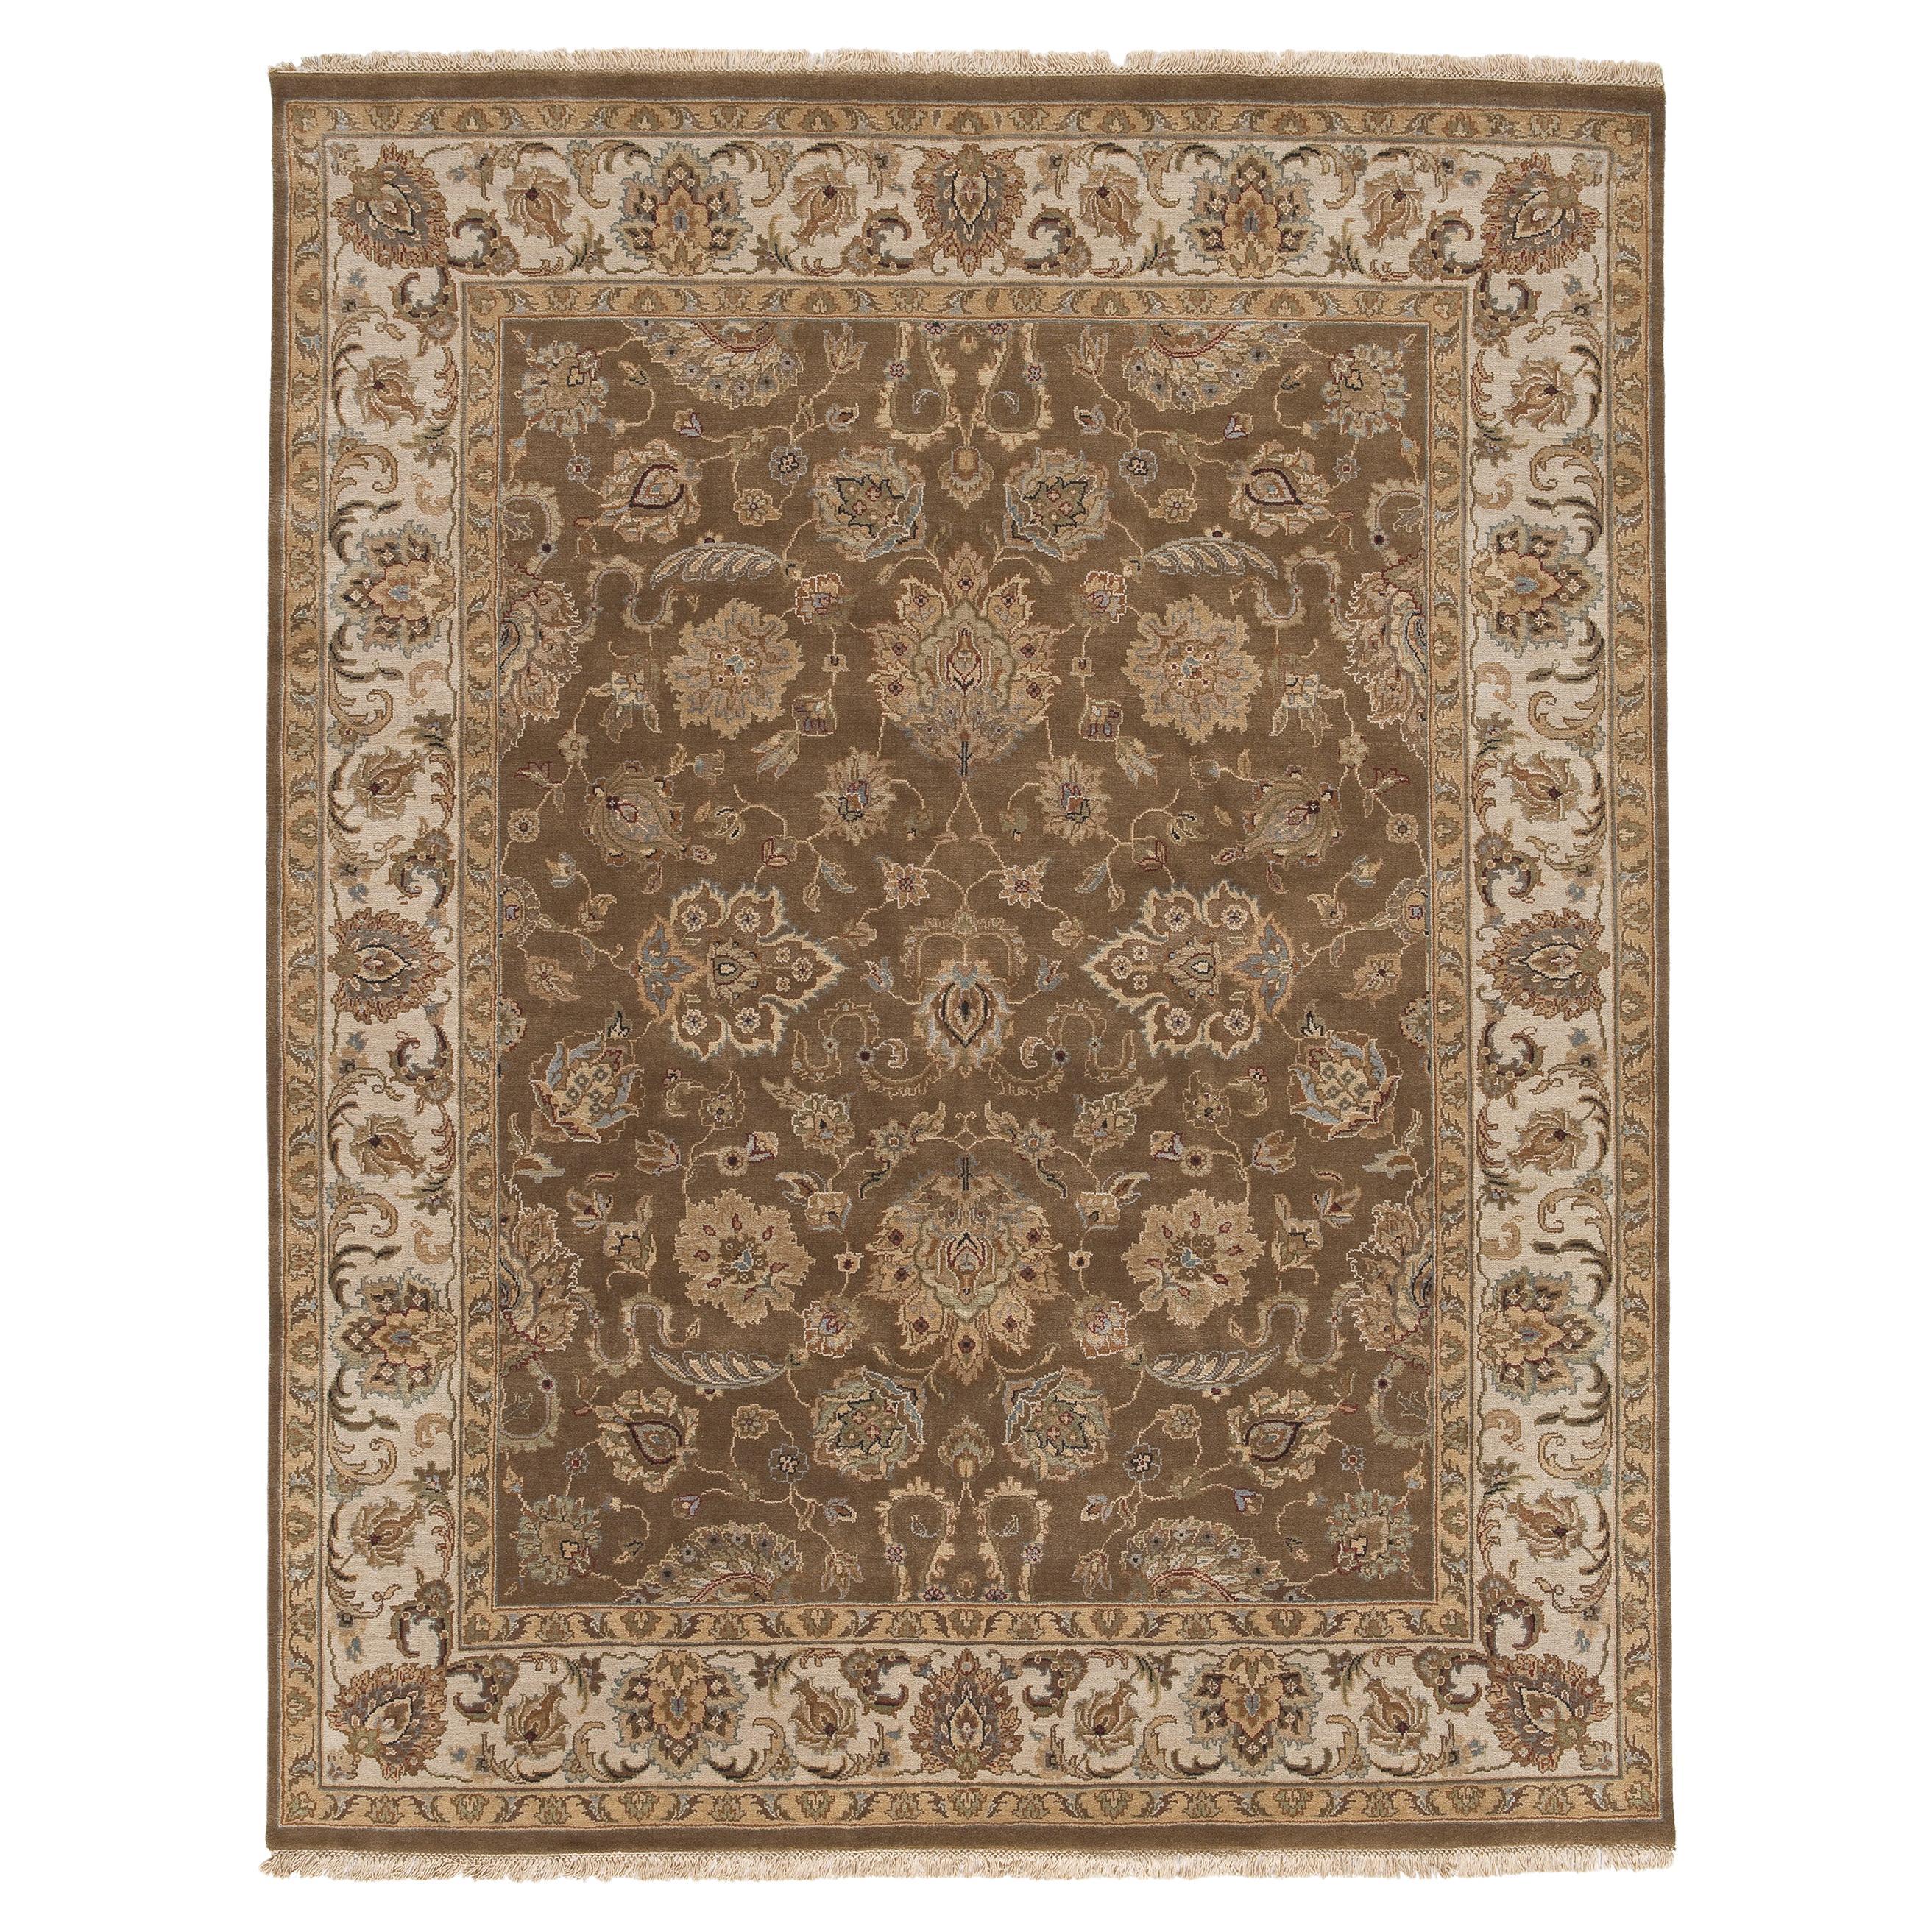 Luxury Traditional Hand-Knotted Agra Fennel and Cream 12X15 Rug